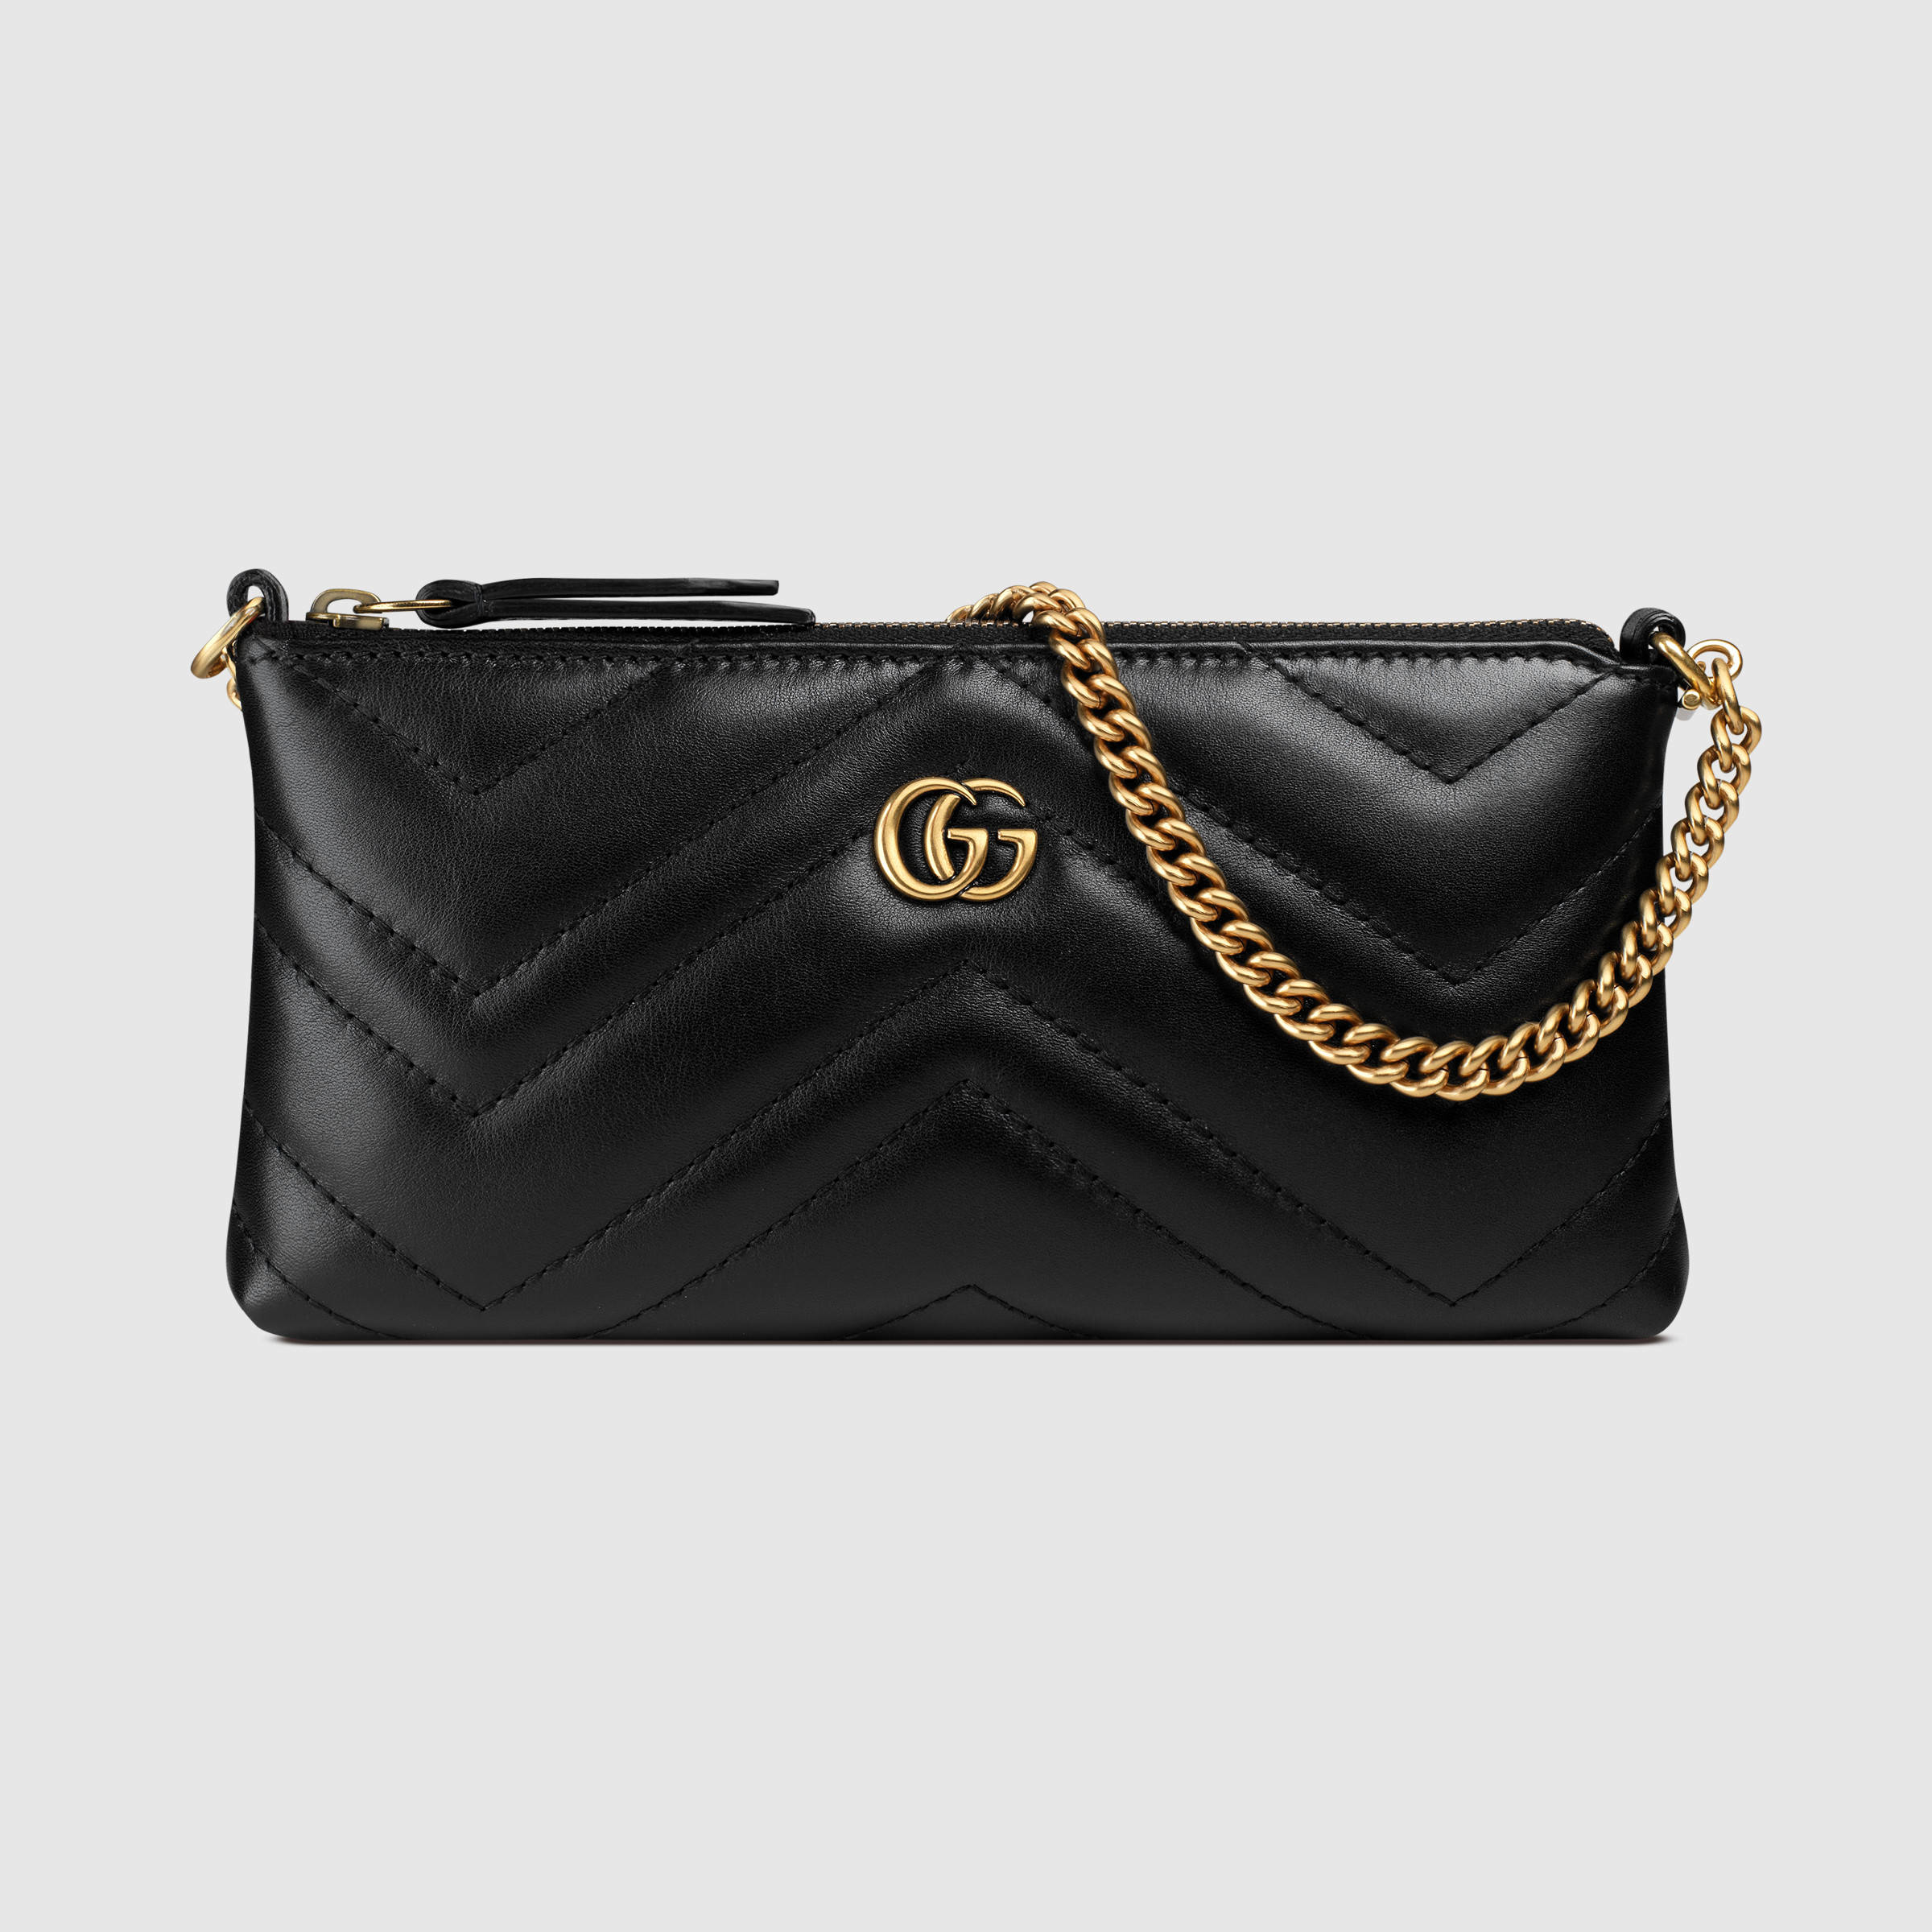 Gucci GG Marmont Leather Chain Mini Shoulder Bag in Black | Lyst